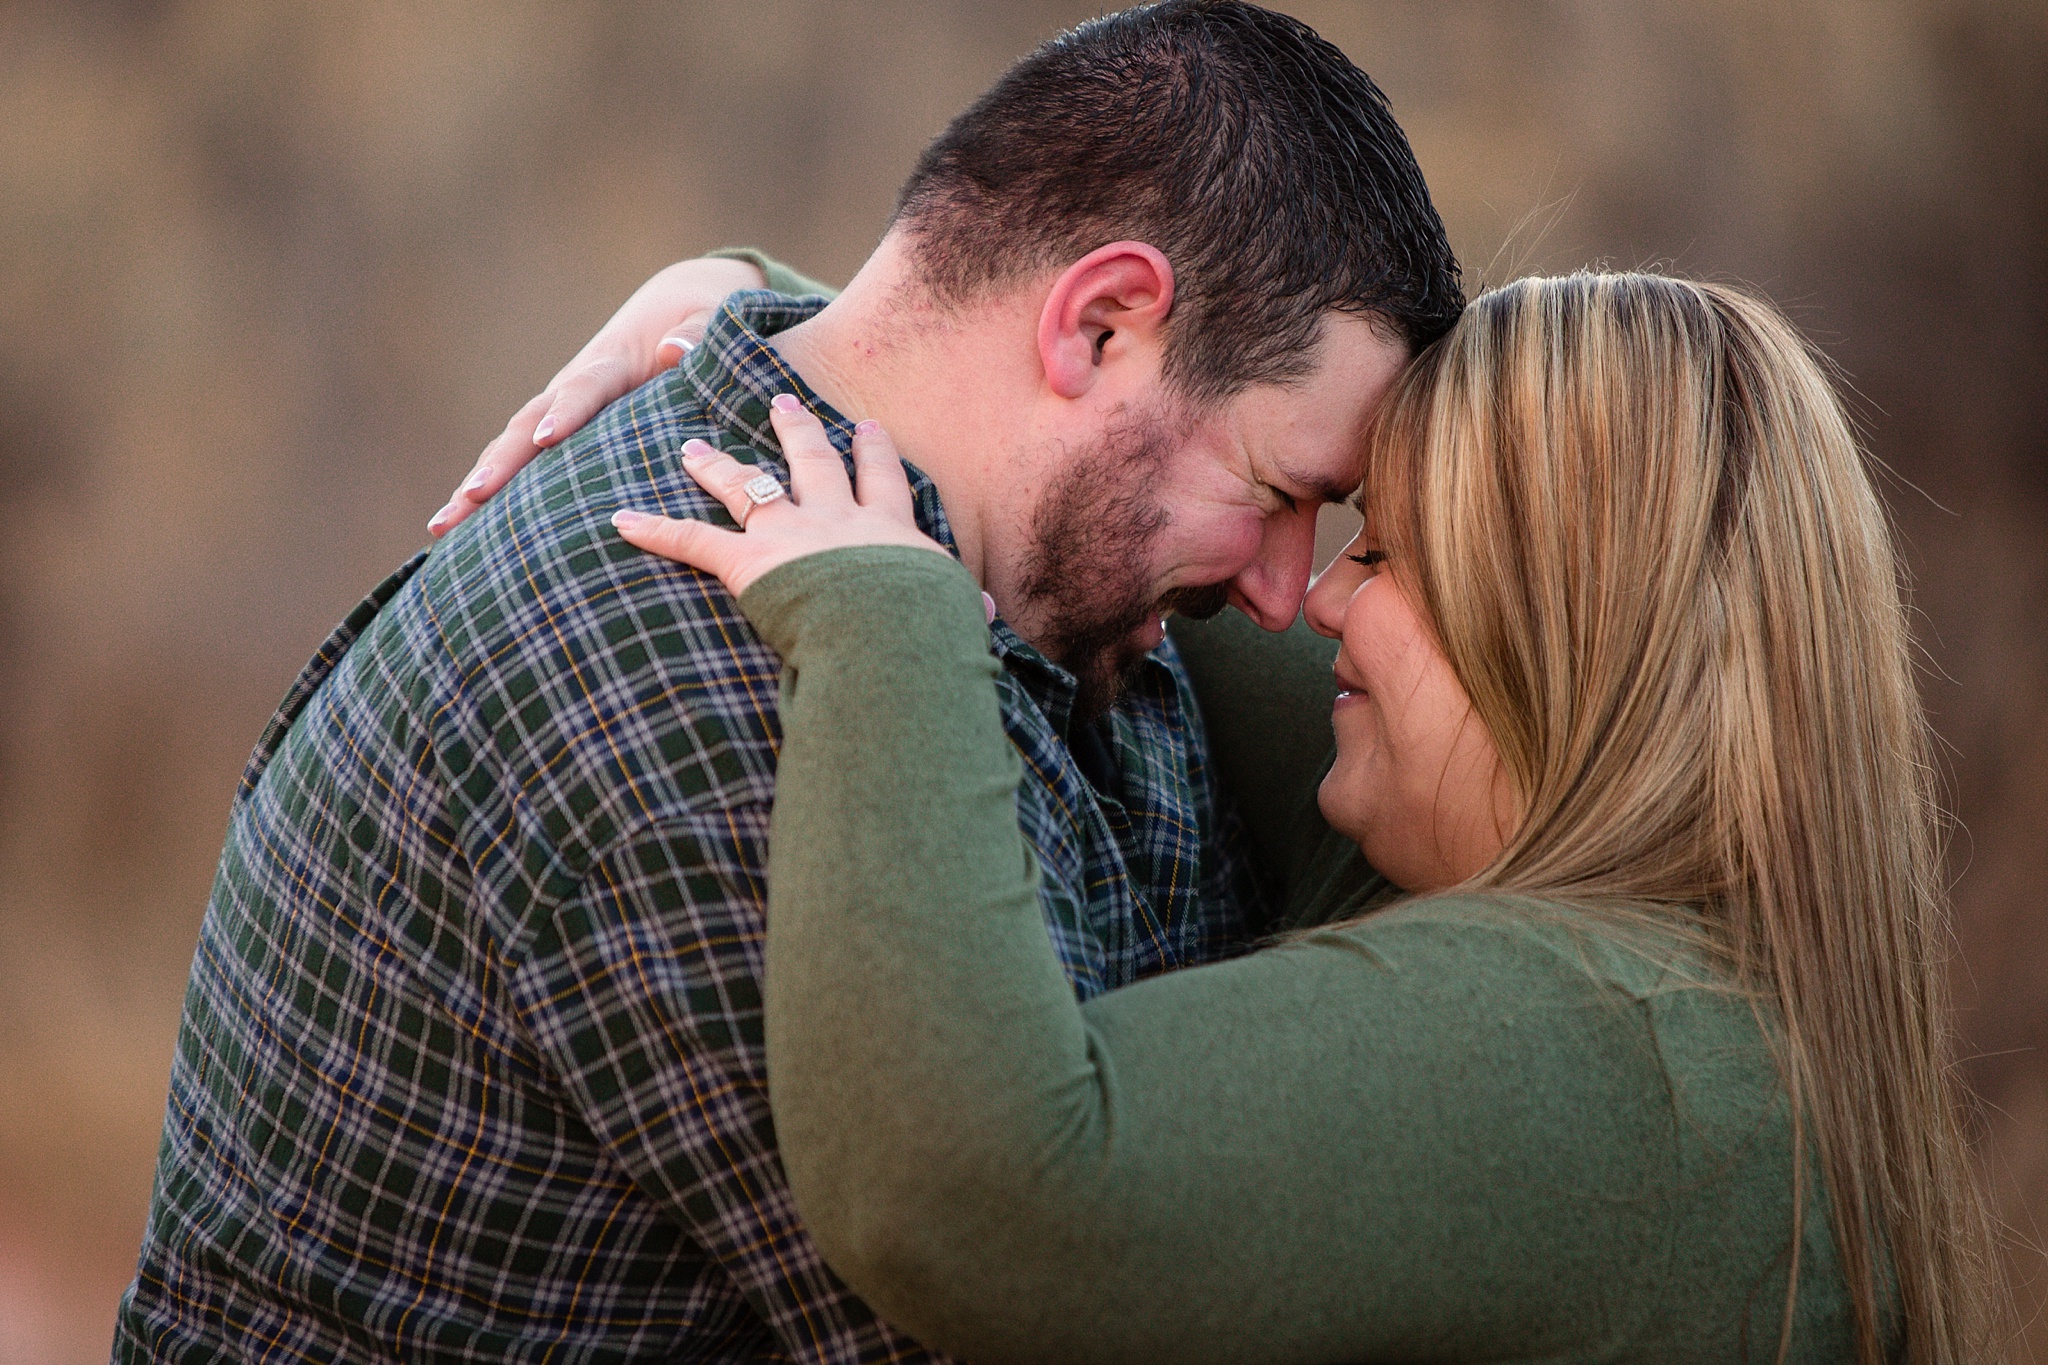 Couple embracing during their Devil’s Backbone engagement session. Briana & Kevin’s Devil’s Backbone and Sweetheart Lanes Engagement Session by Colorado Engagement Photographer, Jennifer Garza. Devil's Backbone Engagement, Devil's Backbone Engagement Session, Loveland Engagement Session, Colorado Engagement Photography, Colorado Engagement Photos, Sweetheart Lanes Bowling Alley, Bowling Alley Engagement, Bowling Engagement Session, Bowling Engagement Photography, Wedding Inspo, Colorado Wedding, Colorado Bride, Brides of Colorado, Bride to Be, Couples Goals